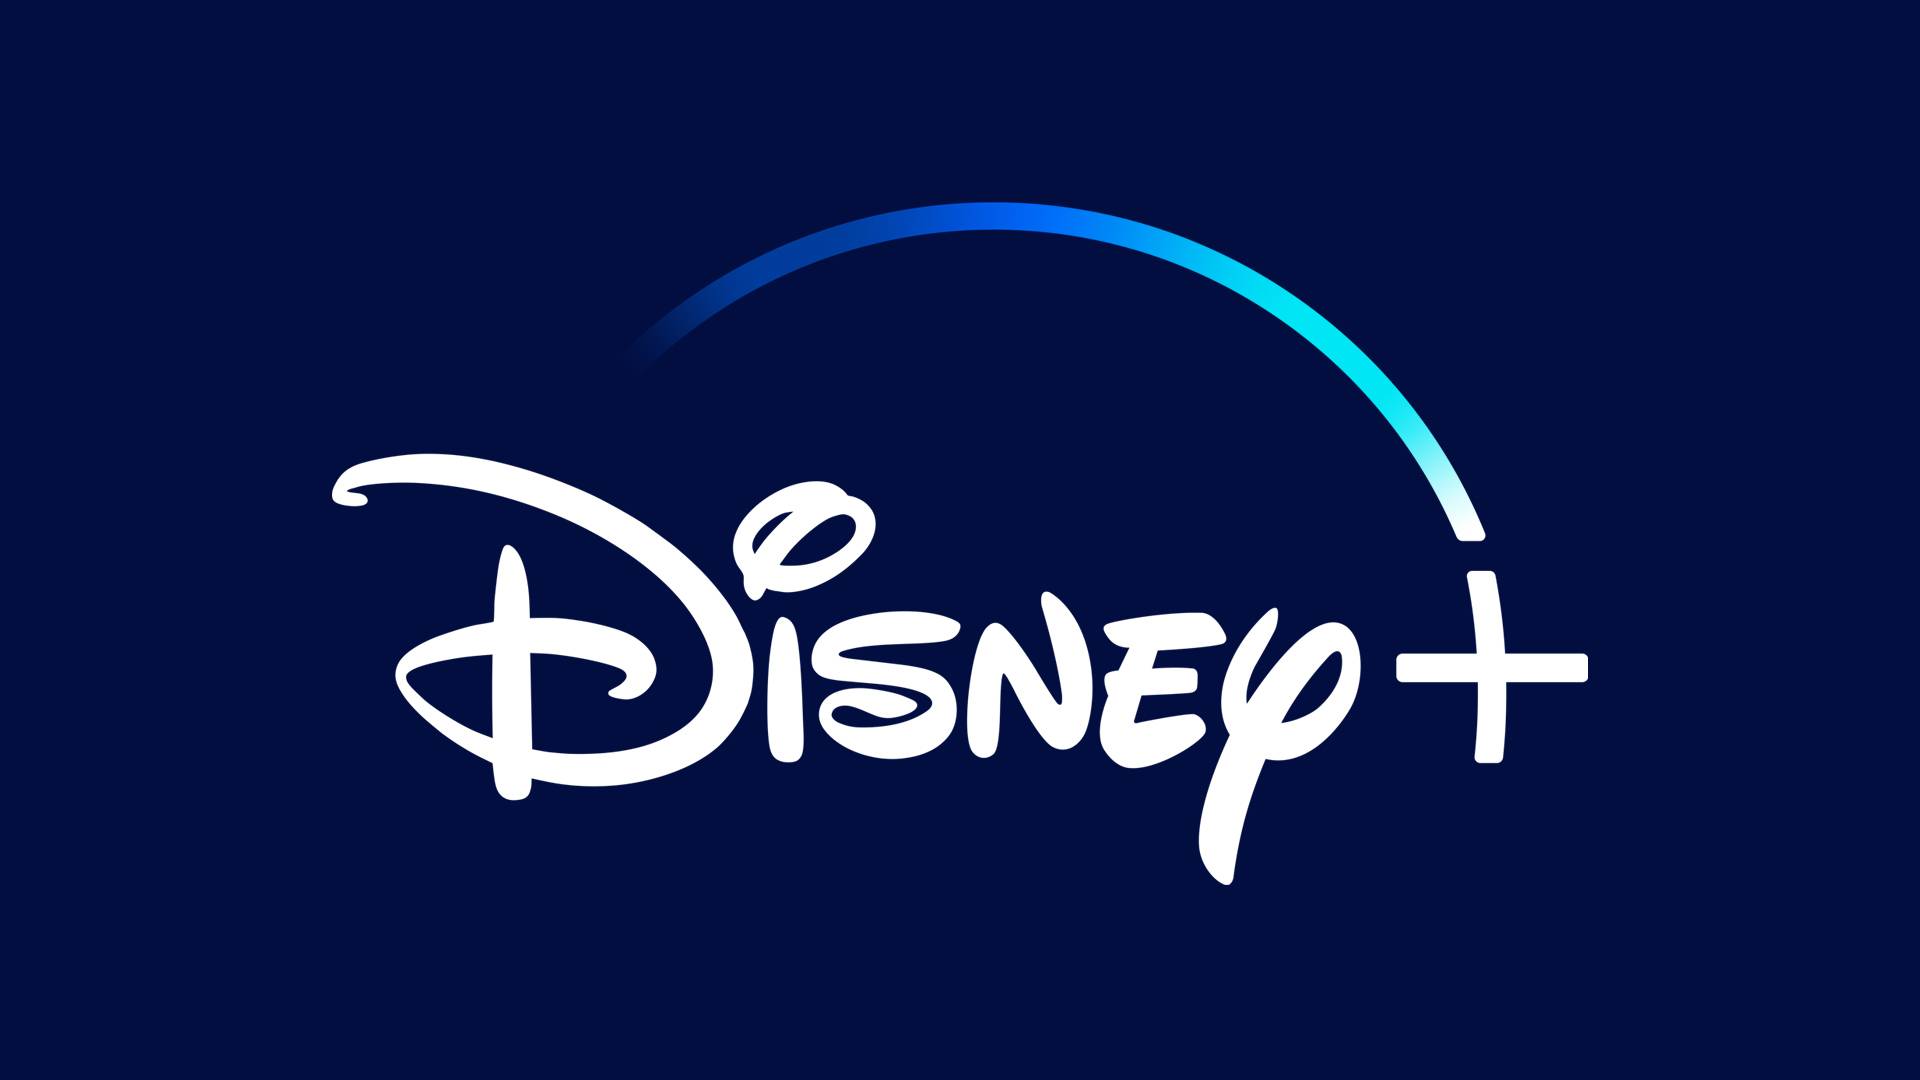 Disney+ will now cost $3 more per month for ad-free viewing